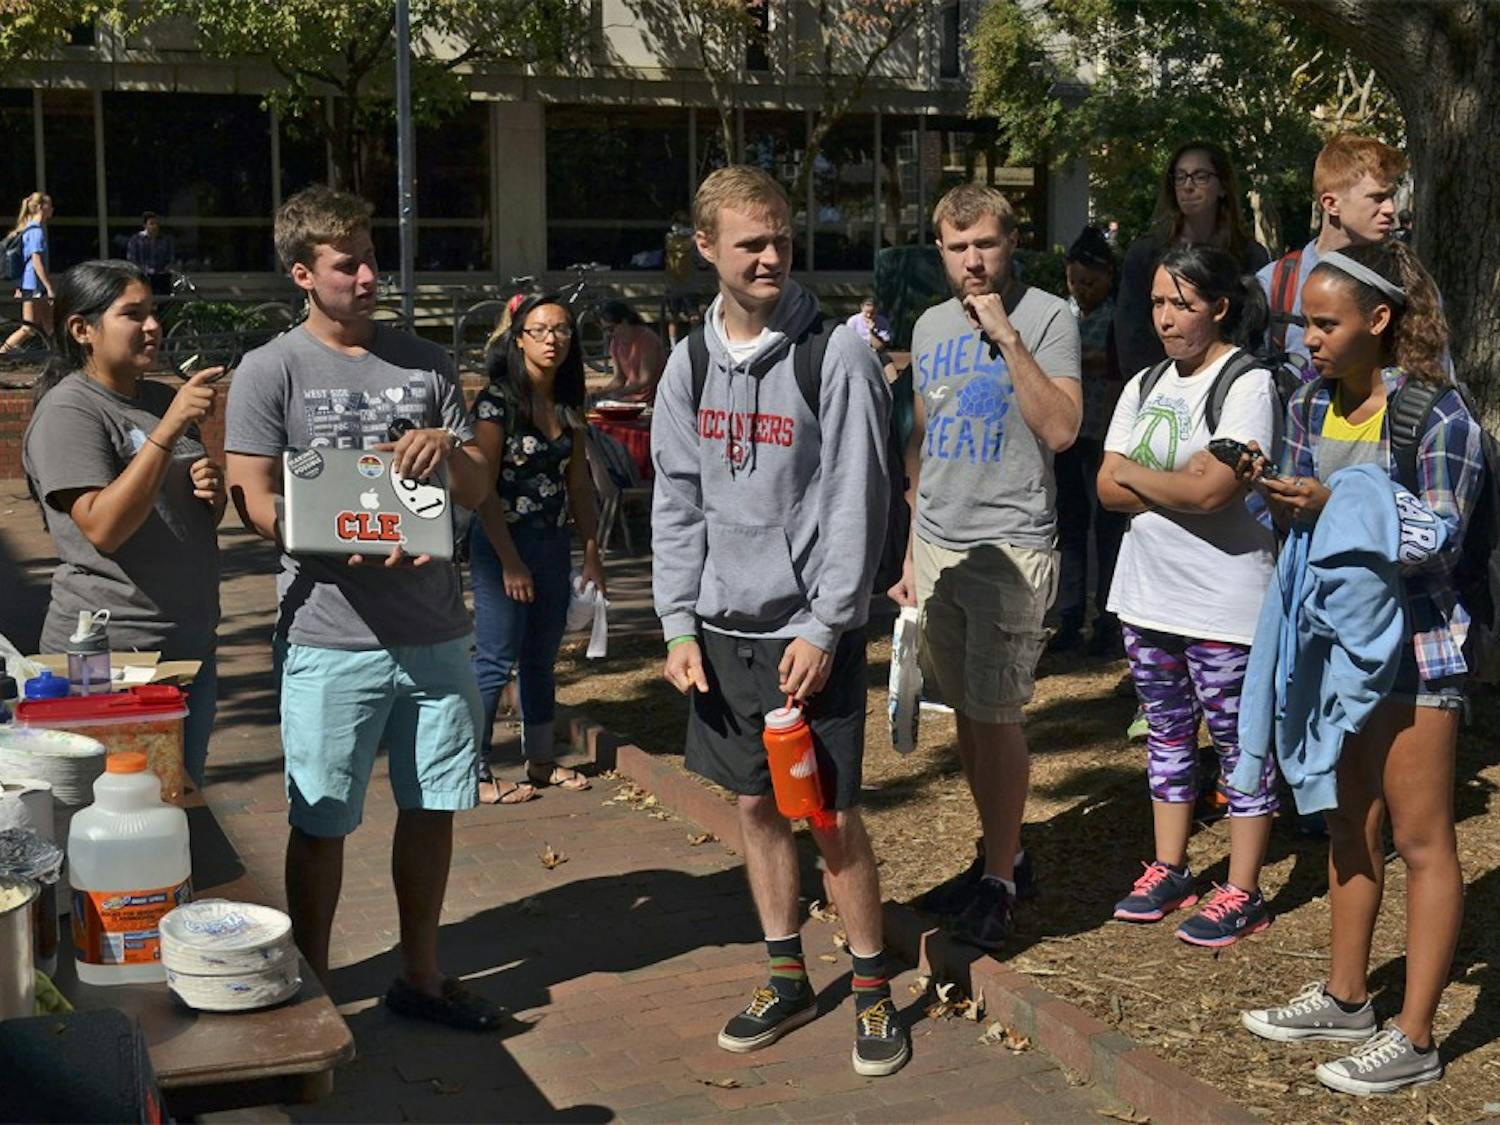 Students wait in line to try free pupusas from local food company "So Good Pupusas", kicking off Hispanic Heritage Month.